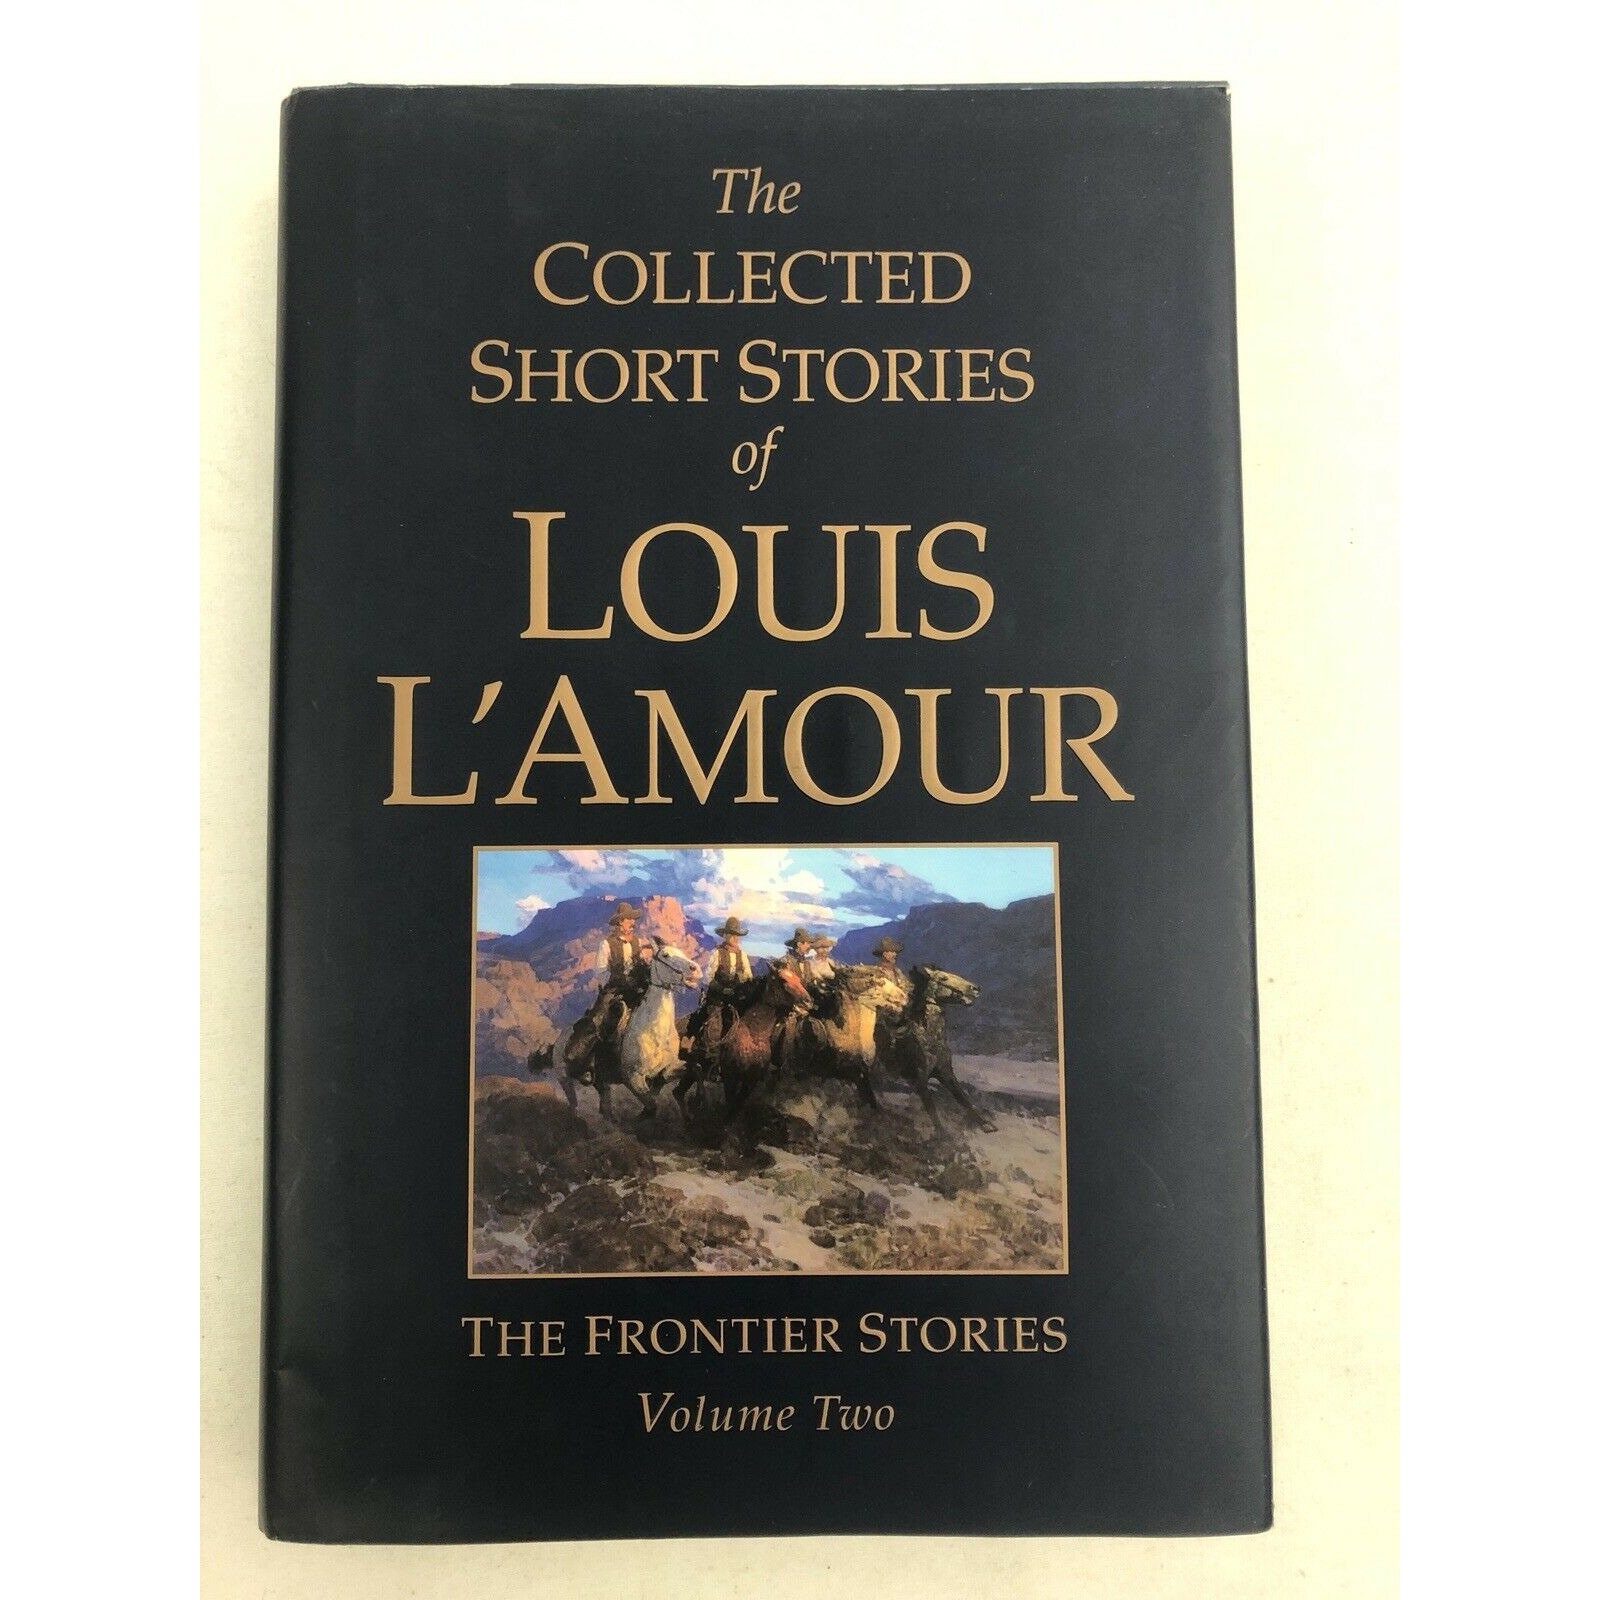 Frontier Stories: The Collected Short Stories of Louis l'Amour, Volume 1:  Frontier Stories (Paperback) 